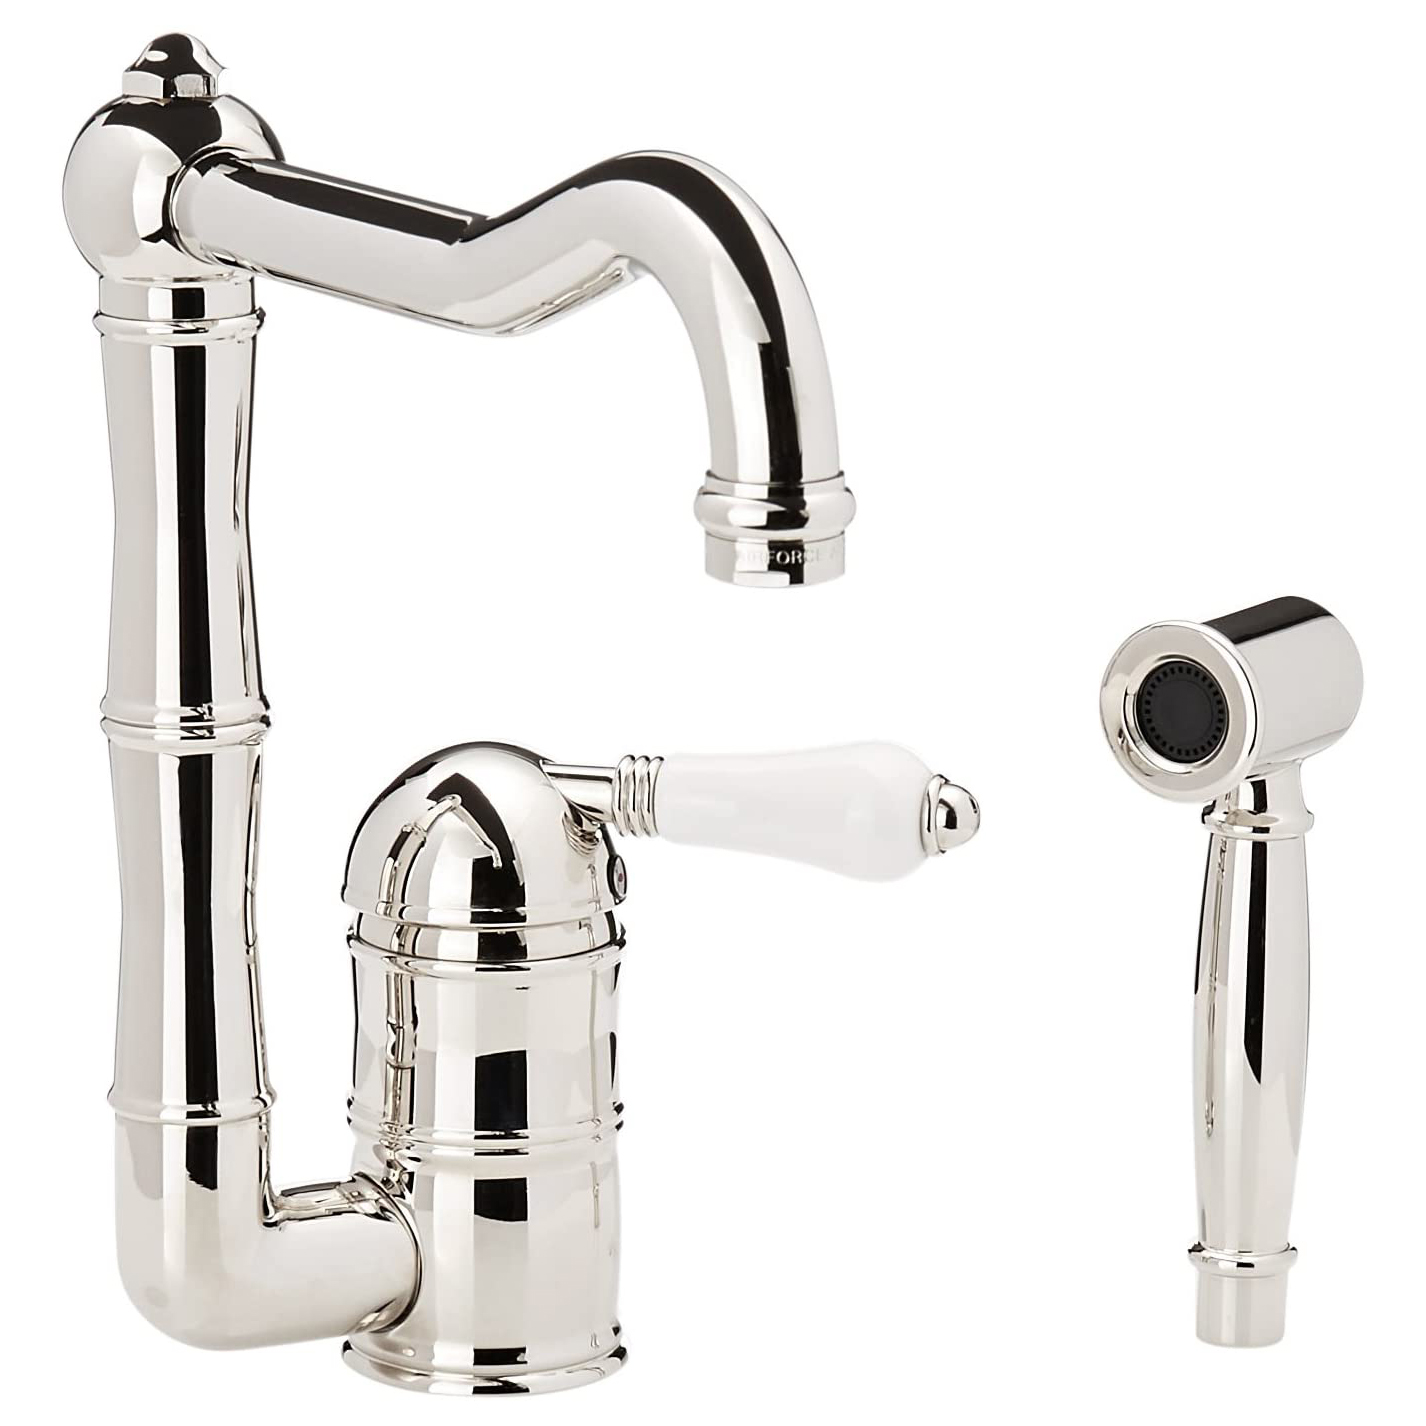 Italian Country Kitchen Faucet in Polished Nickel w/Porcelain Lever & Spray